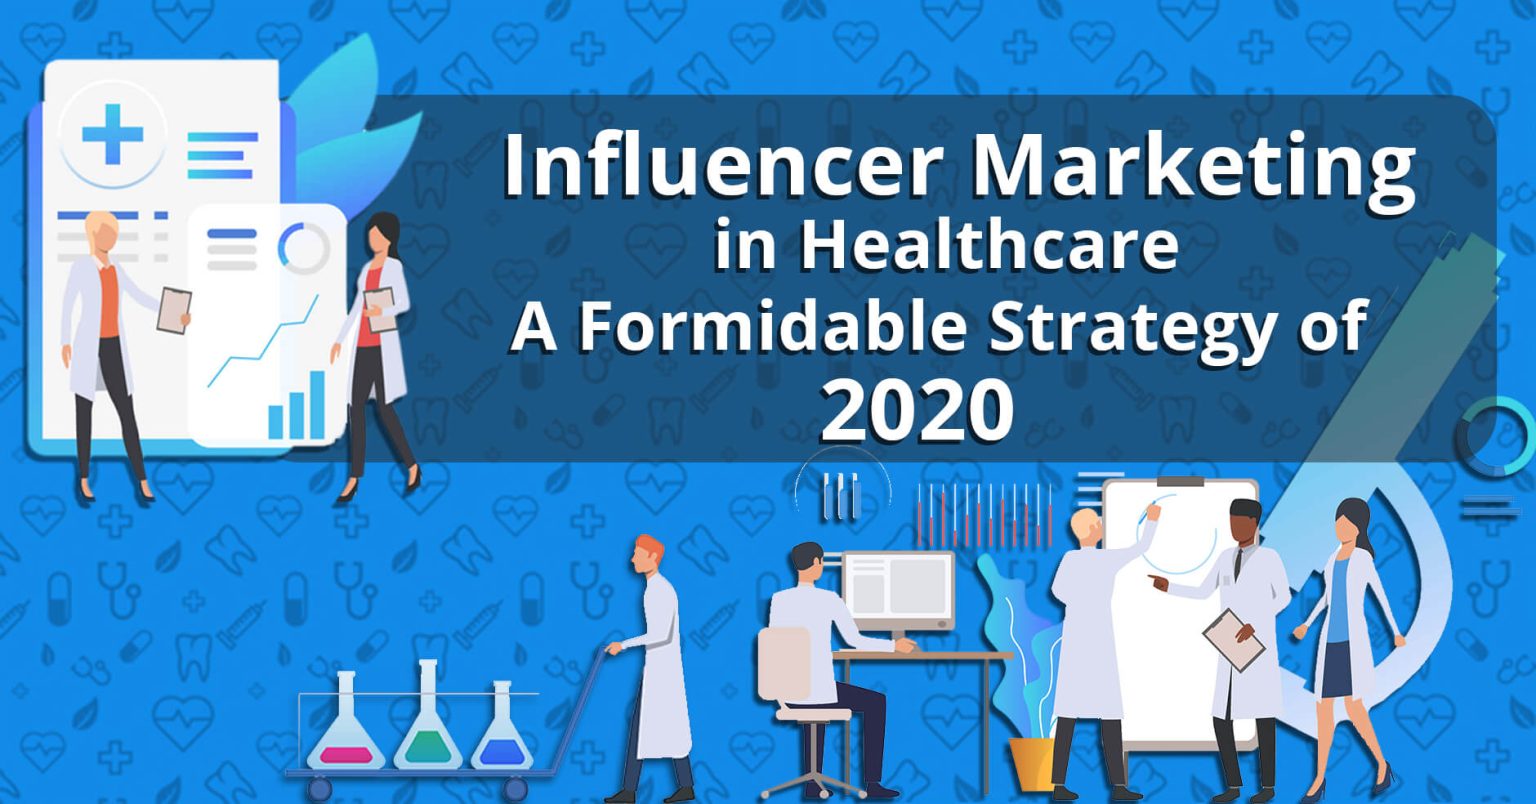 Influencer Marketing in Healthcare A Formidable Strategy of 2020 - medicoreach